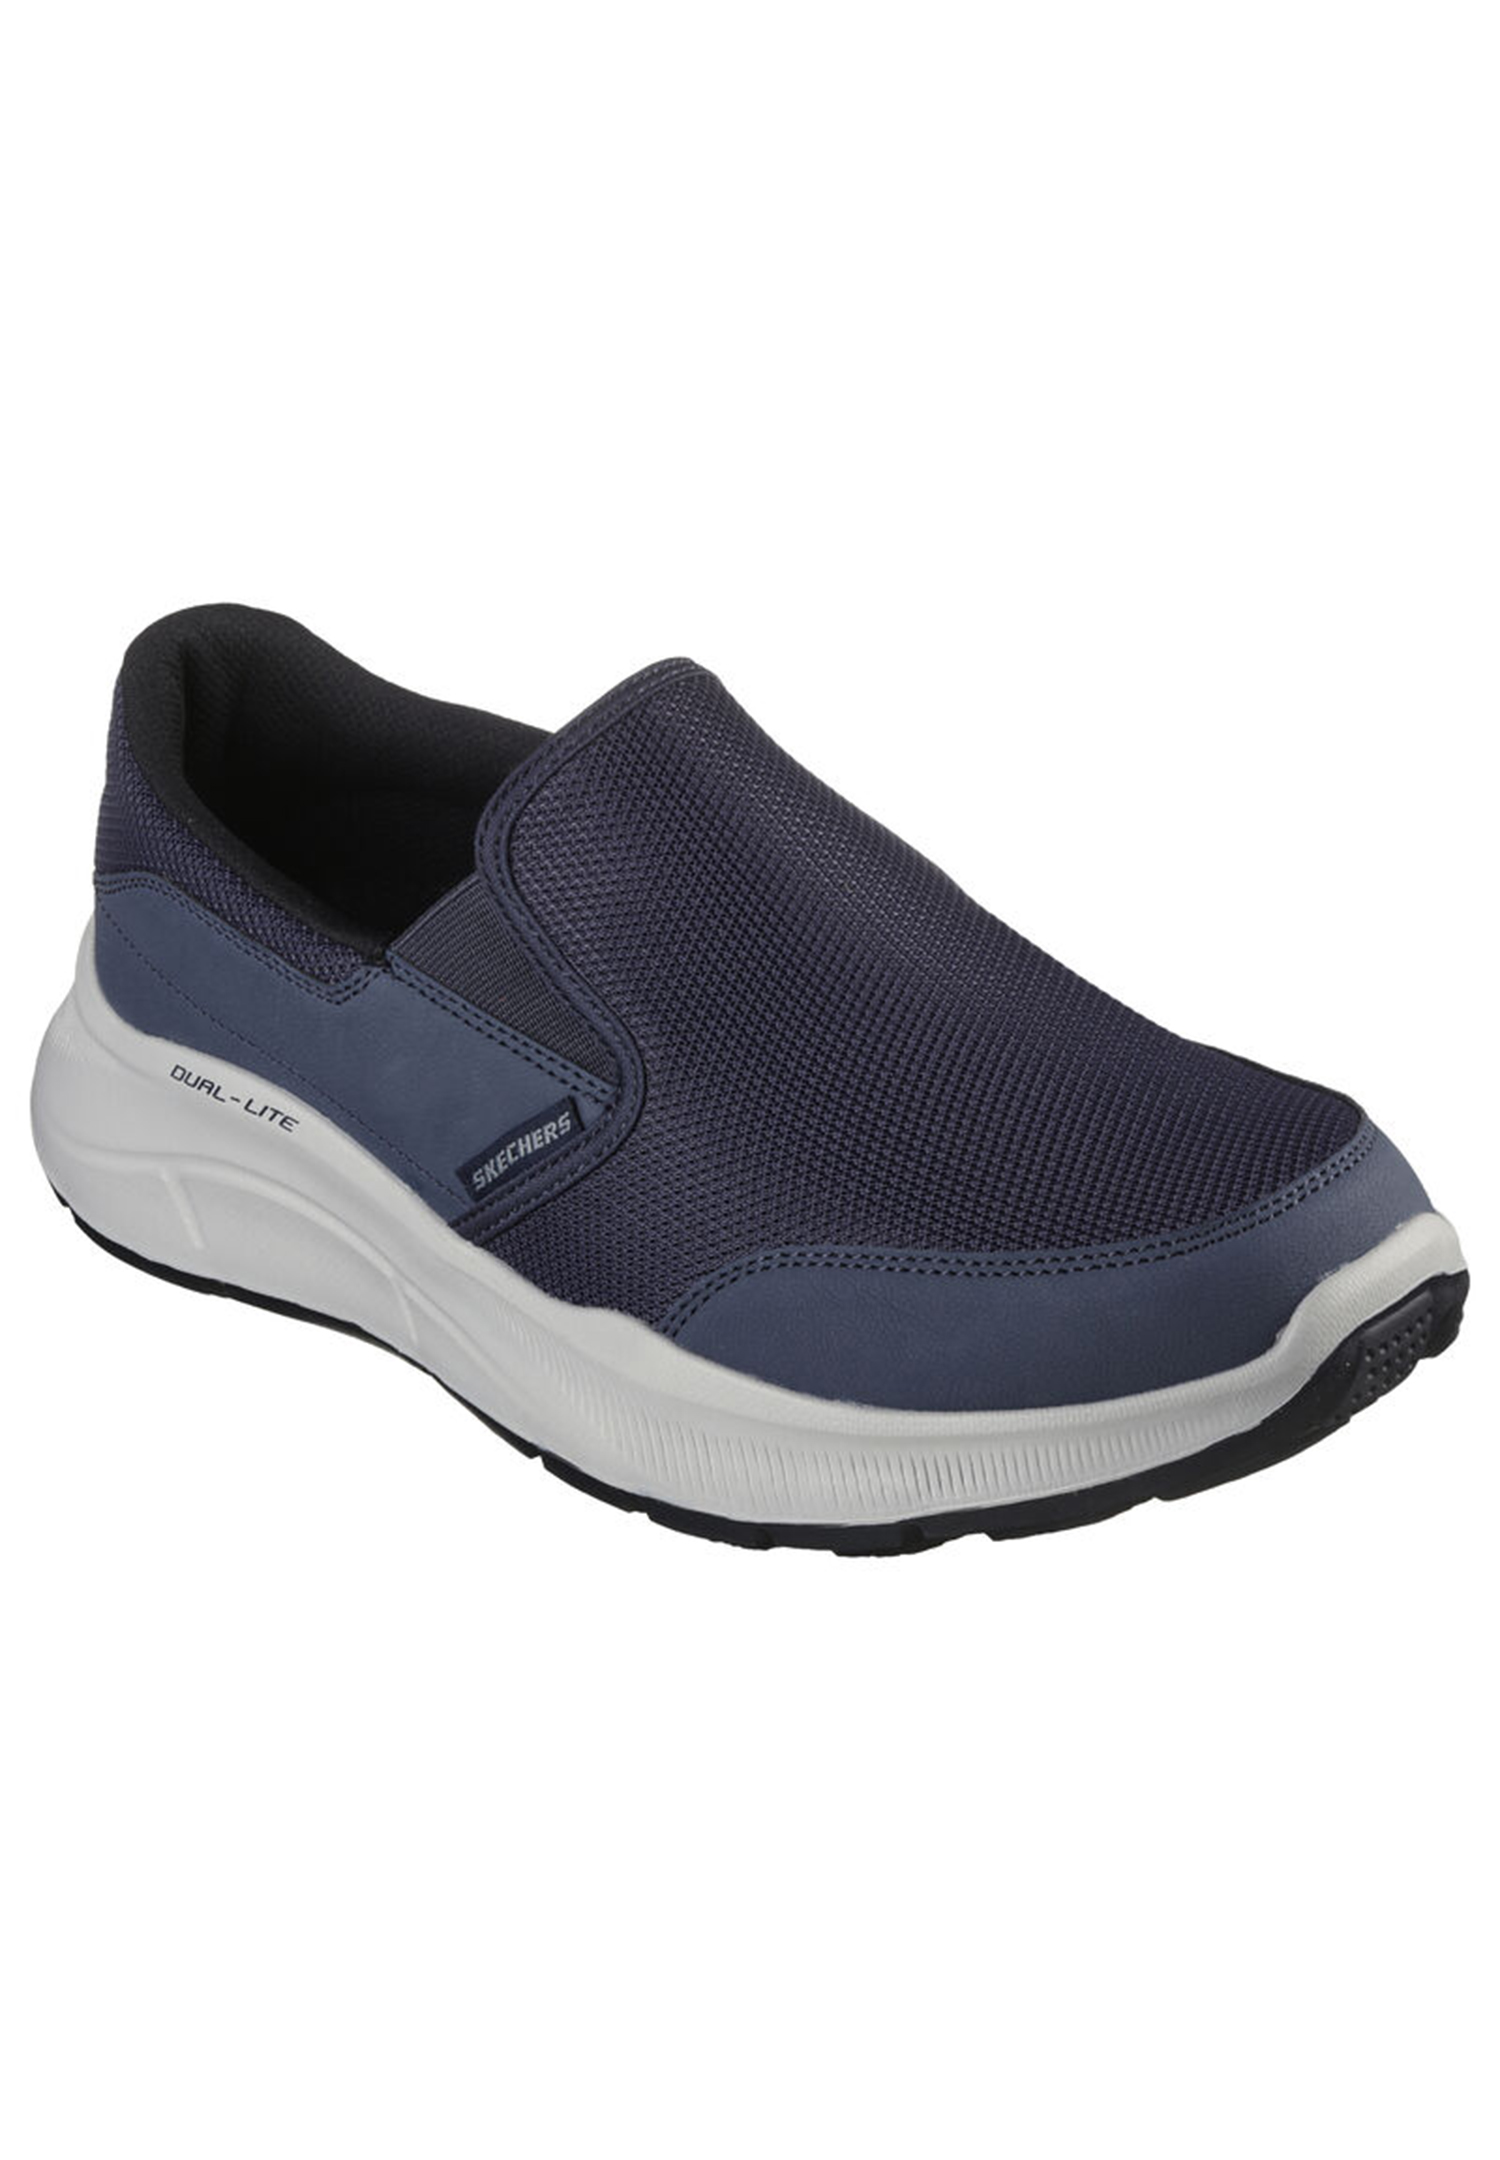 Skechers Herren Relaxed Fit Equalizer 5.0 PERSISTABLE Schuhe 232515 blau